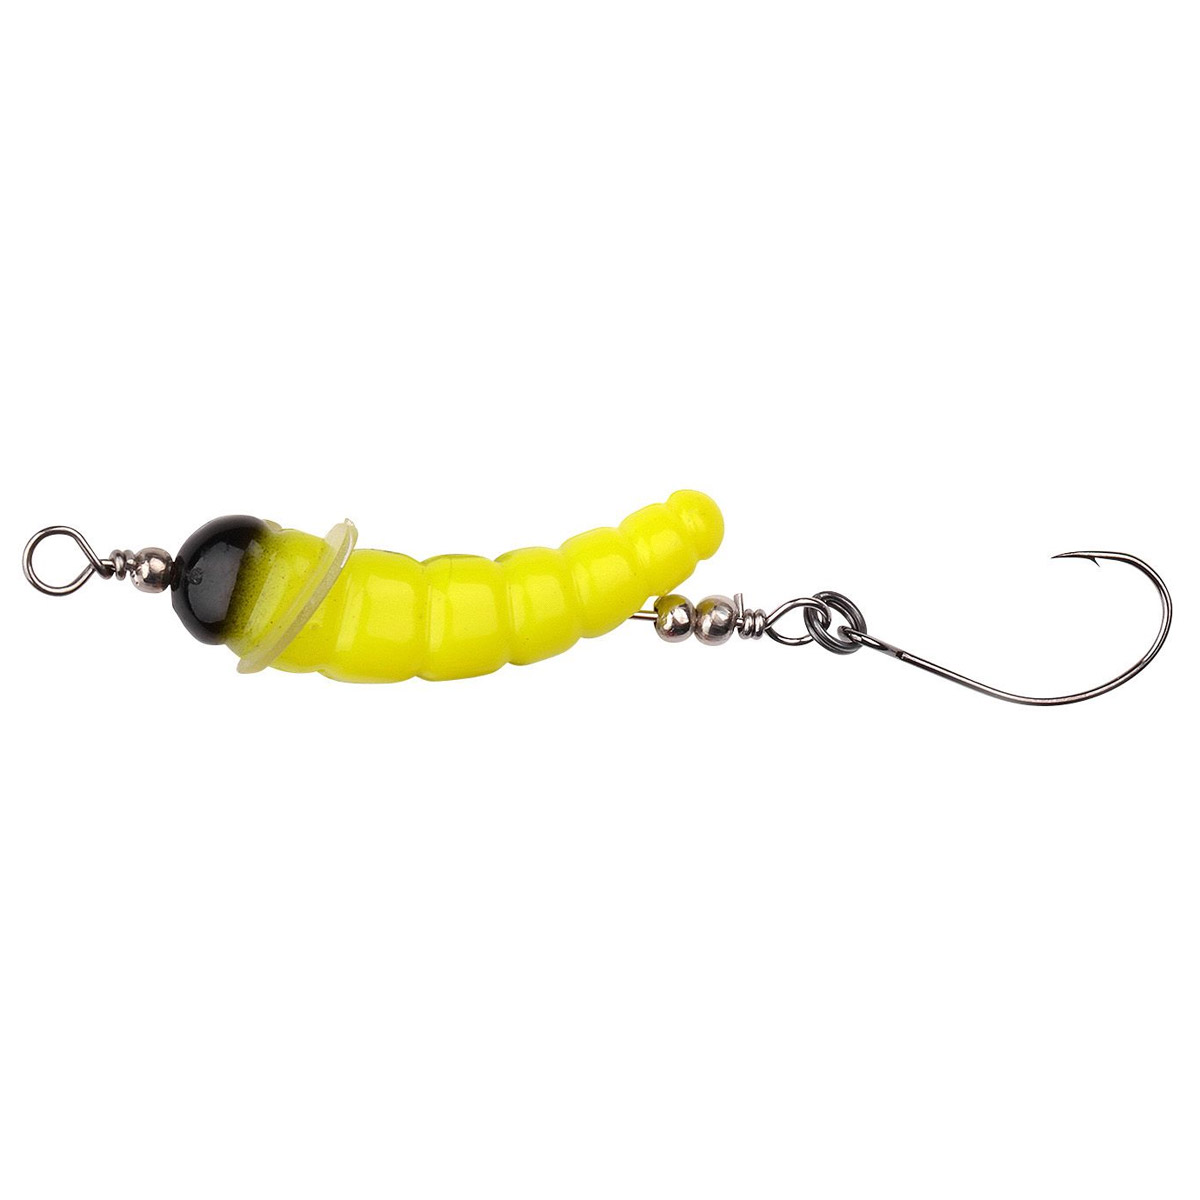 Spro Trout Master Hard Camola 37 -  Yellow